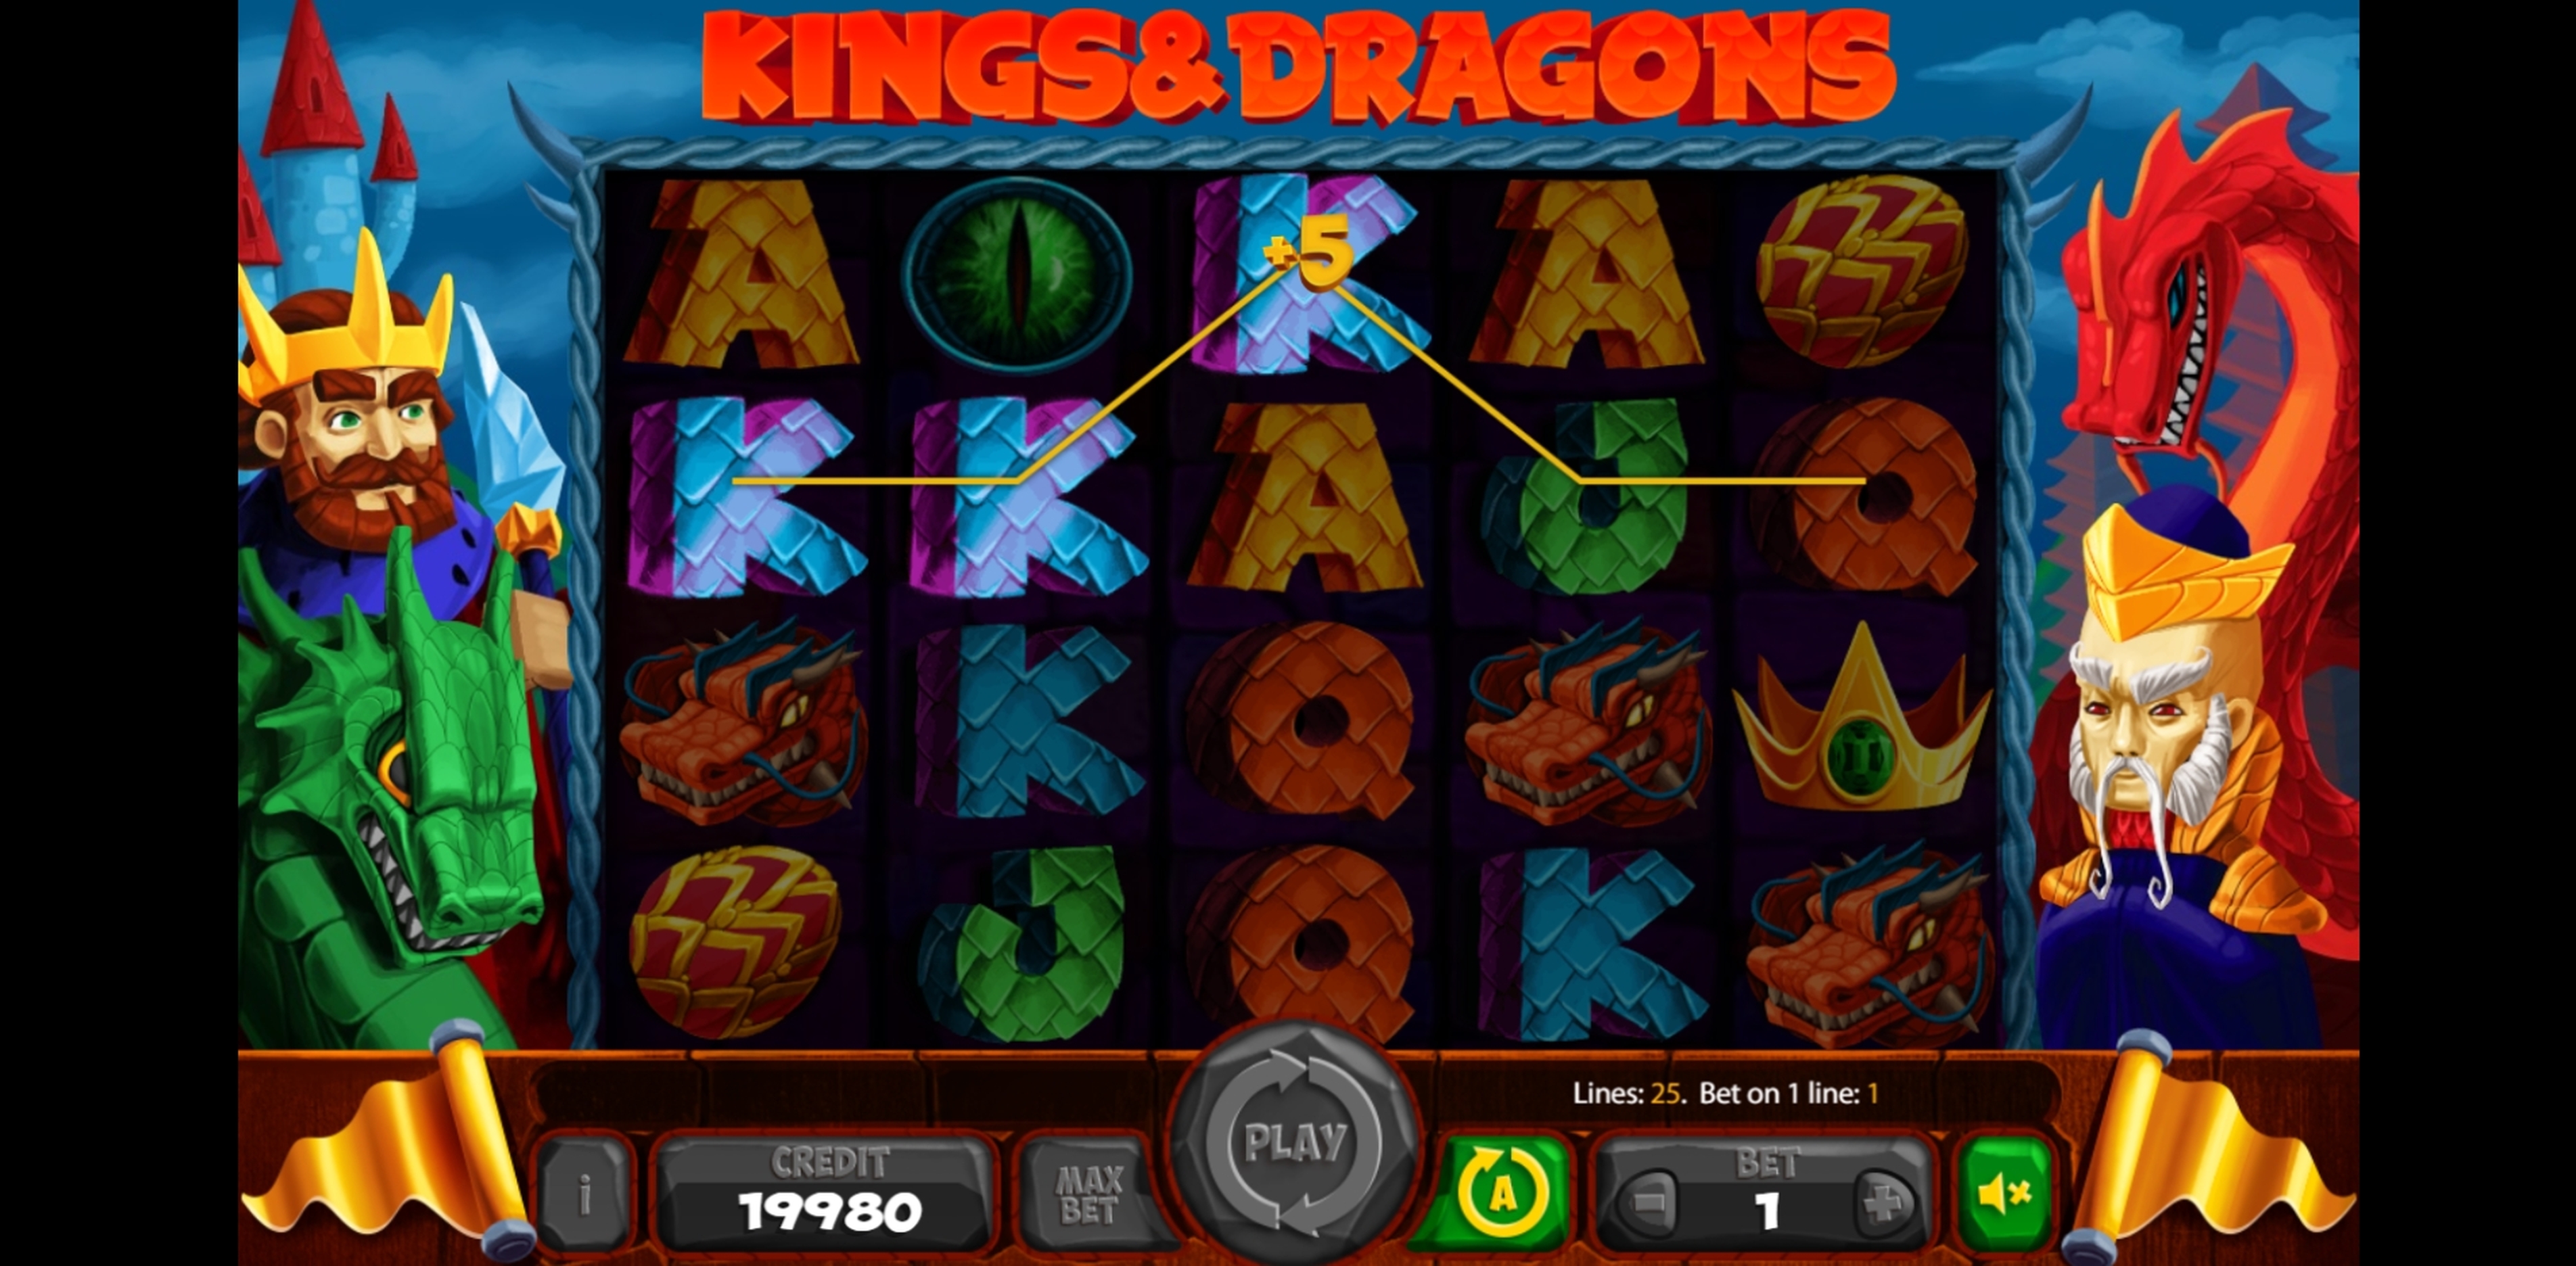 Win Money in Kings And Dragons Free Slot Game by X Card